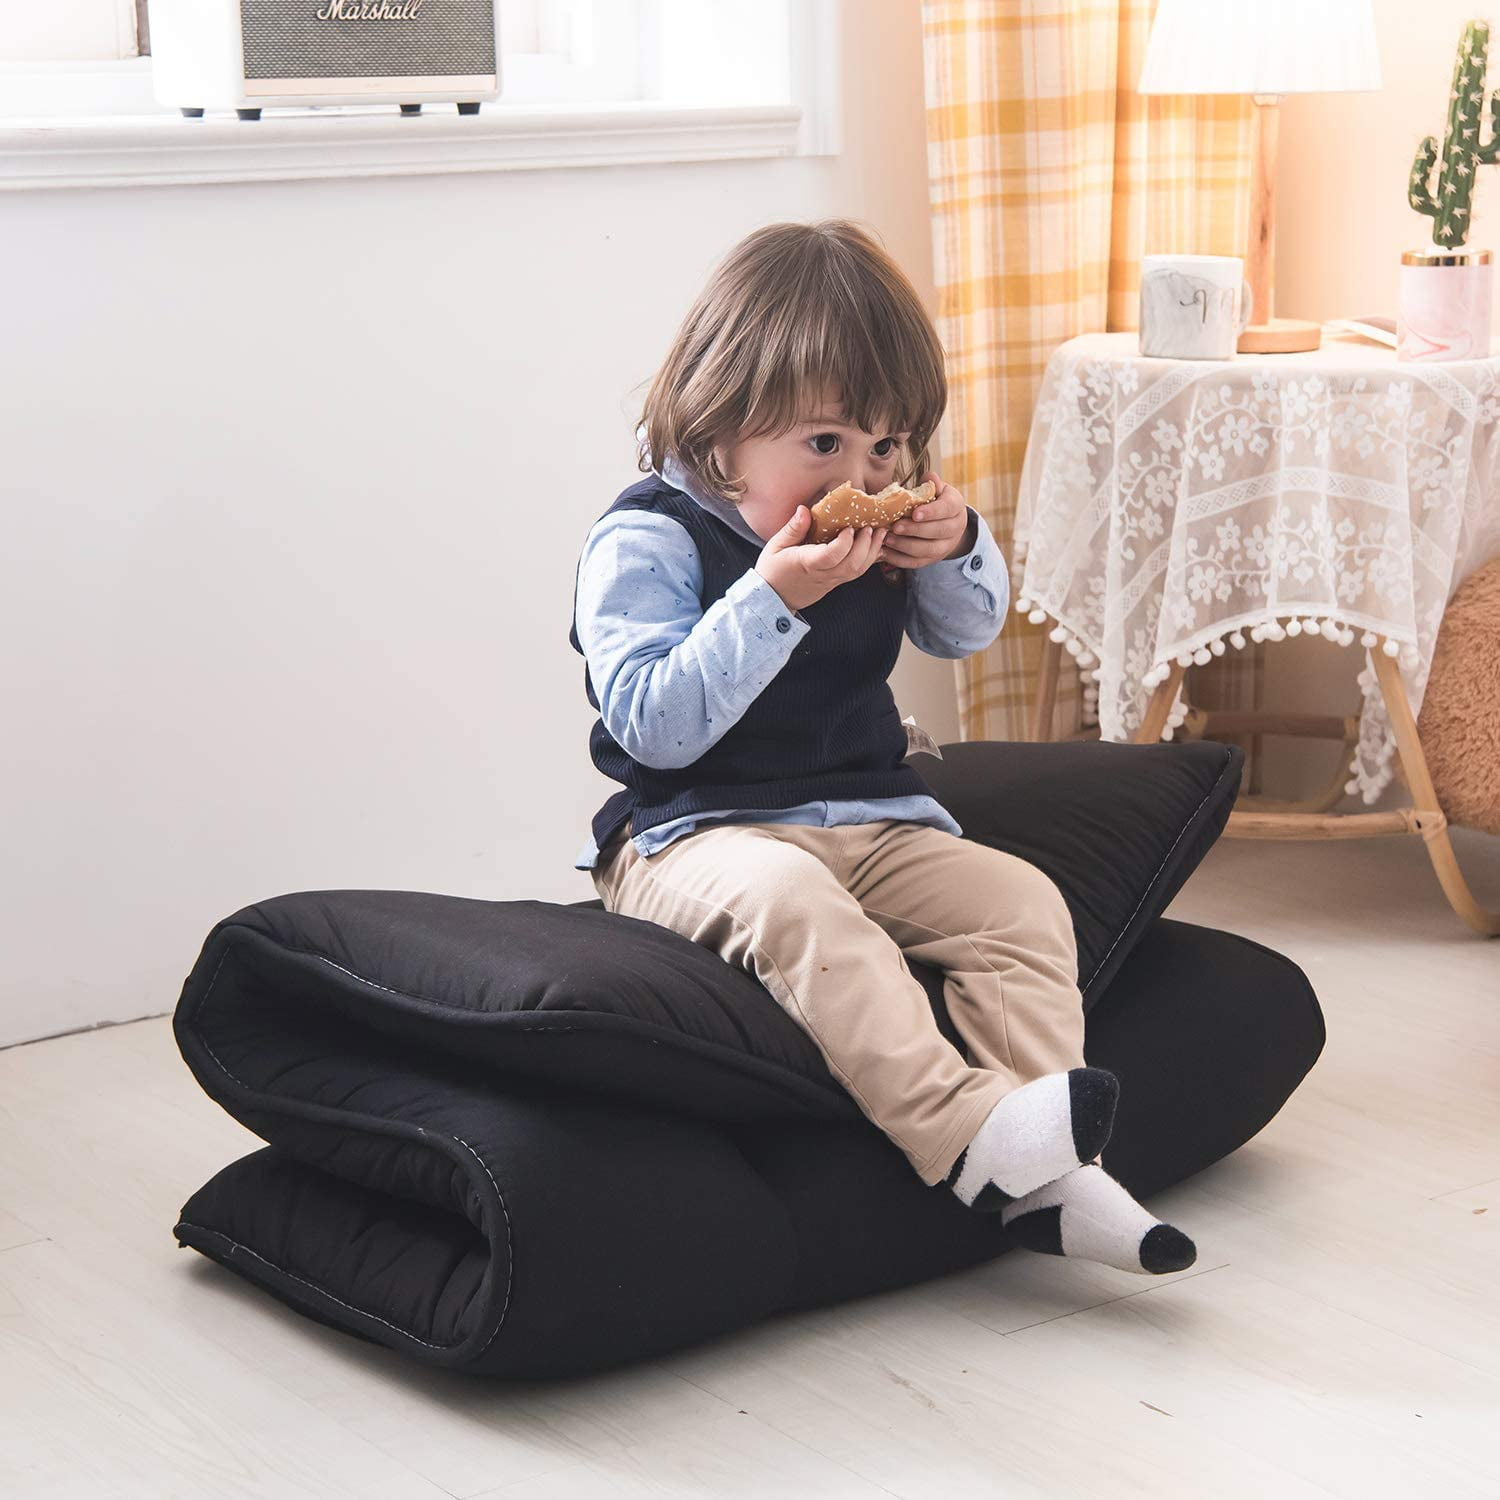 YOSHOOT Portable Toddler Travel Bed Mattress for Toddler Portable Travel Mattress Camp Mattress Tatami Mat with Mattress Cover and Carry Storage Bag Kids Memory Foam Floor Mattress Bed Foldable 